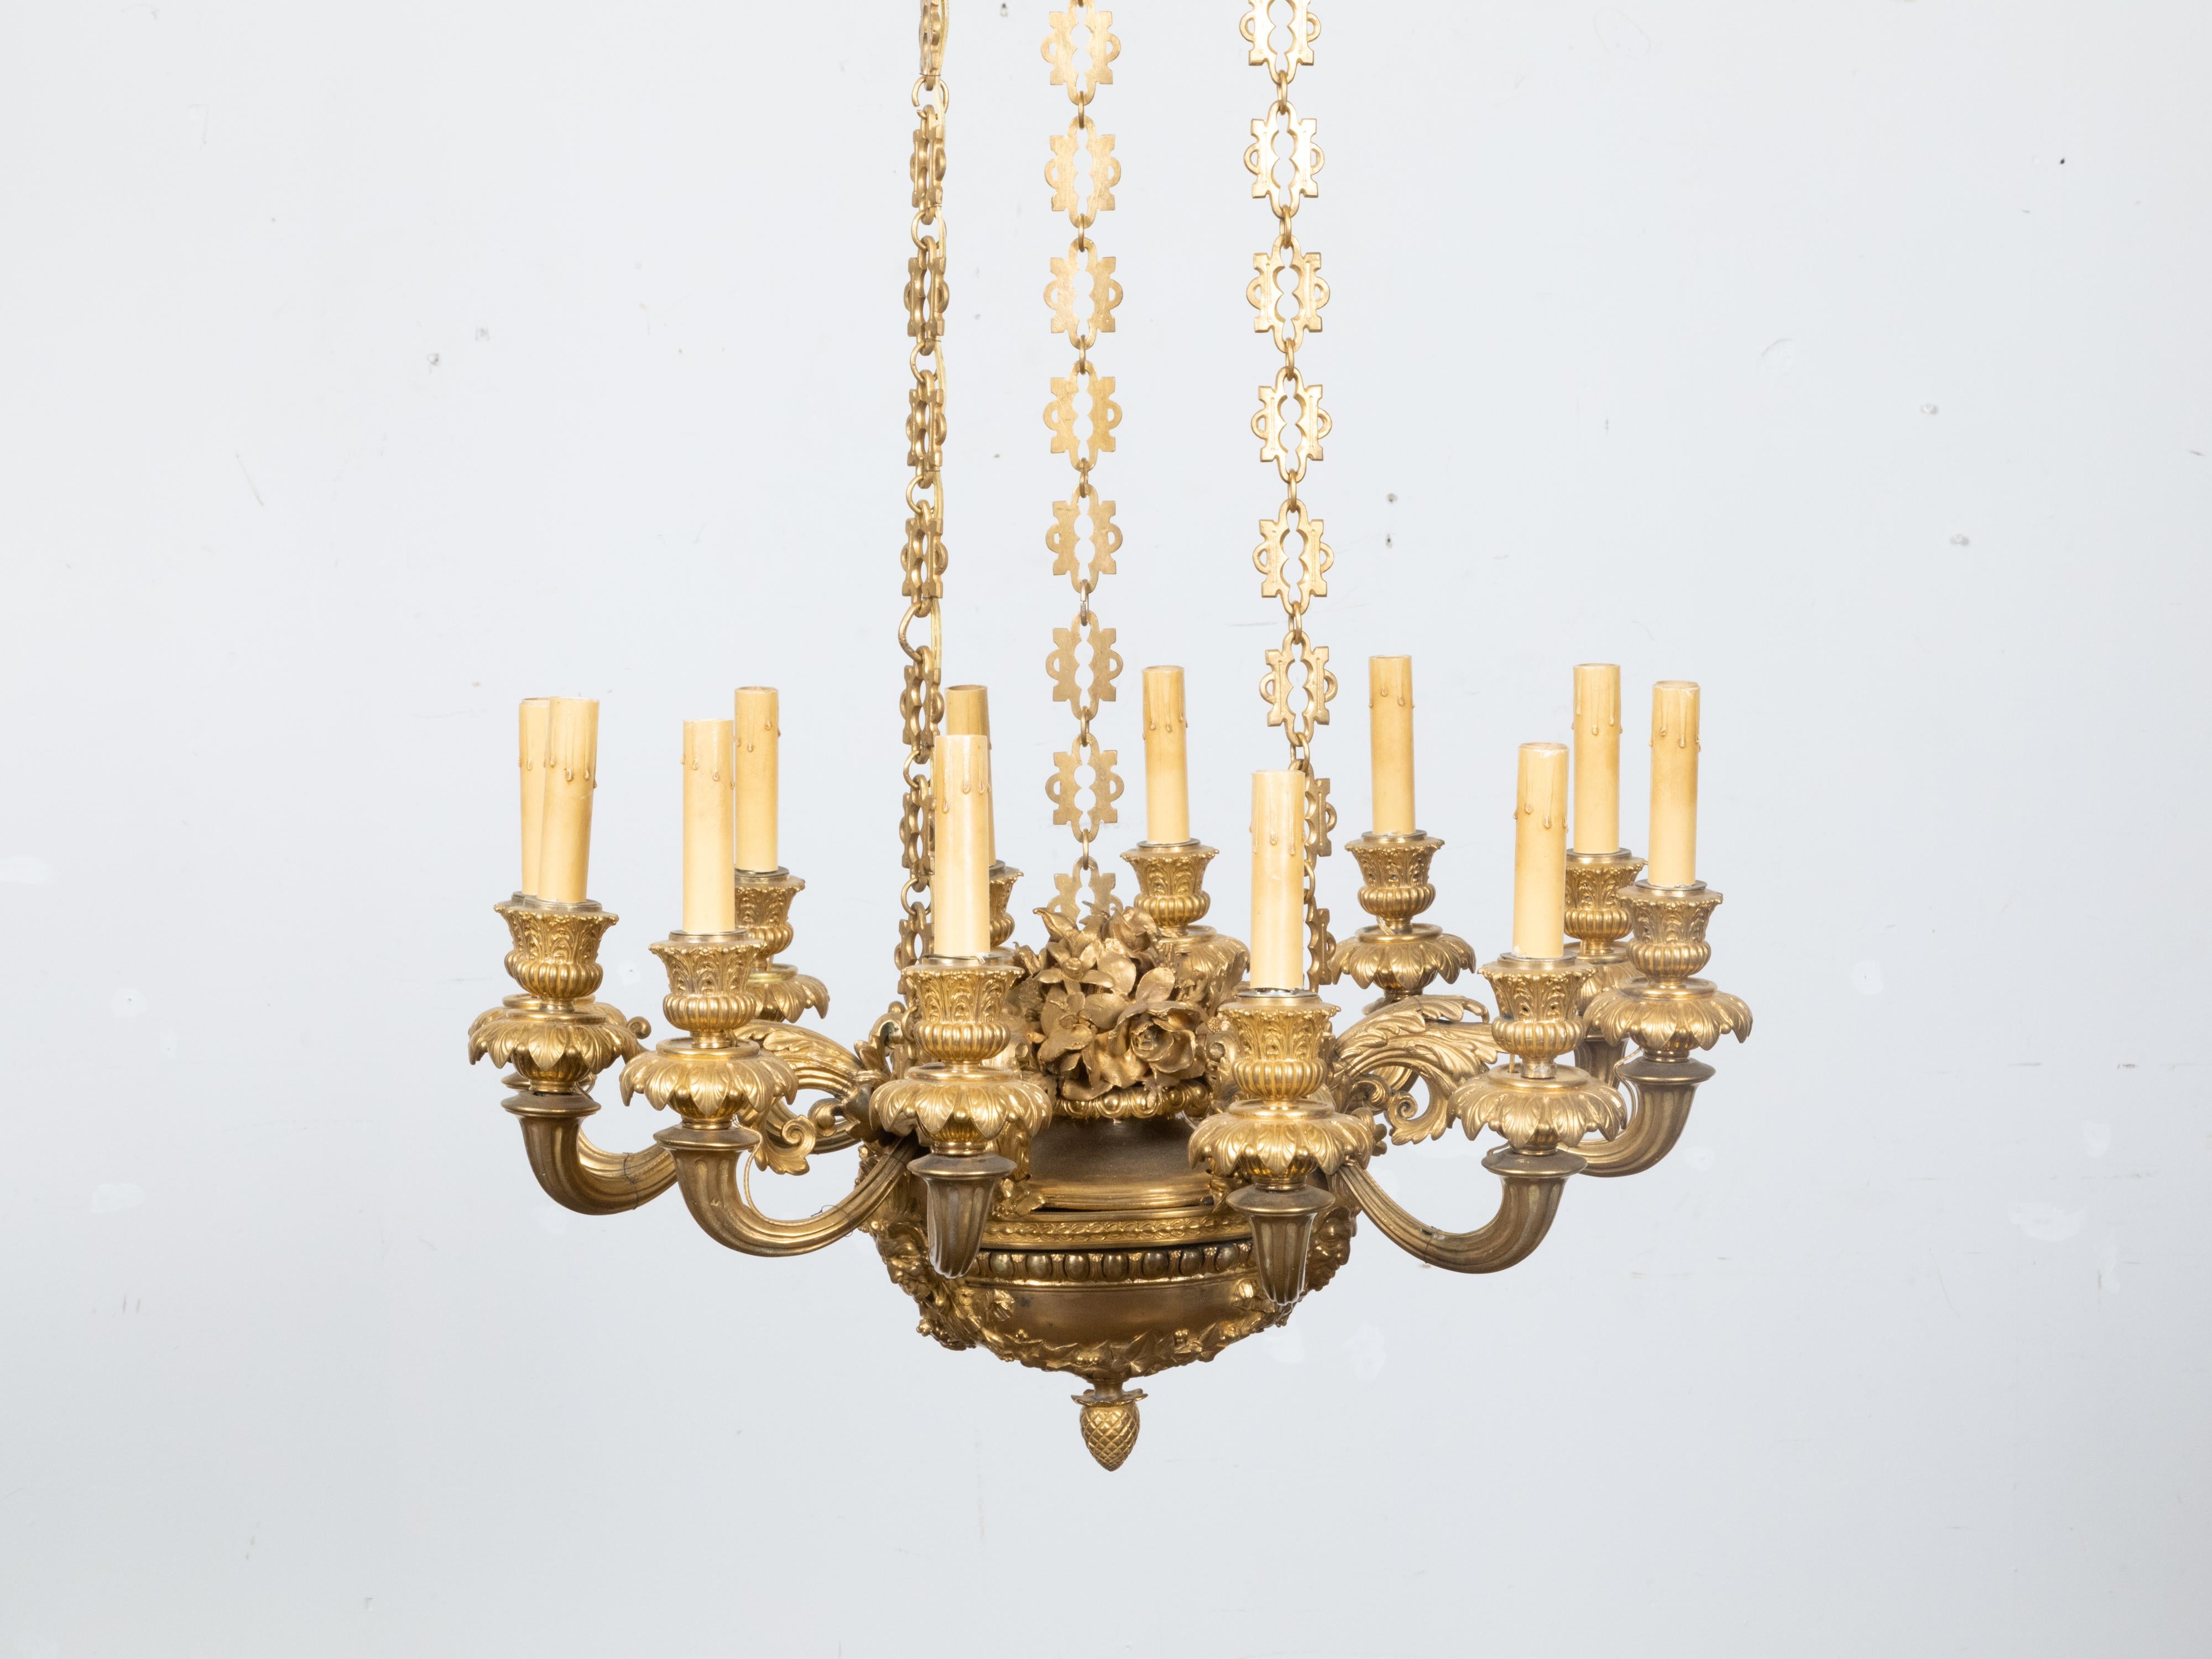 French Napoléon III 19th Century Gilt Bronze 12 Light Chandelier with Mascarons For Sale 3